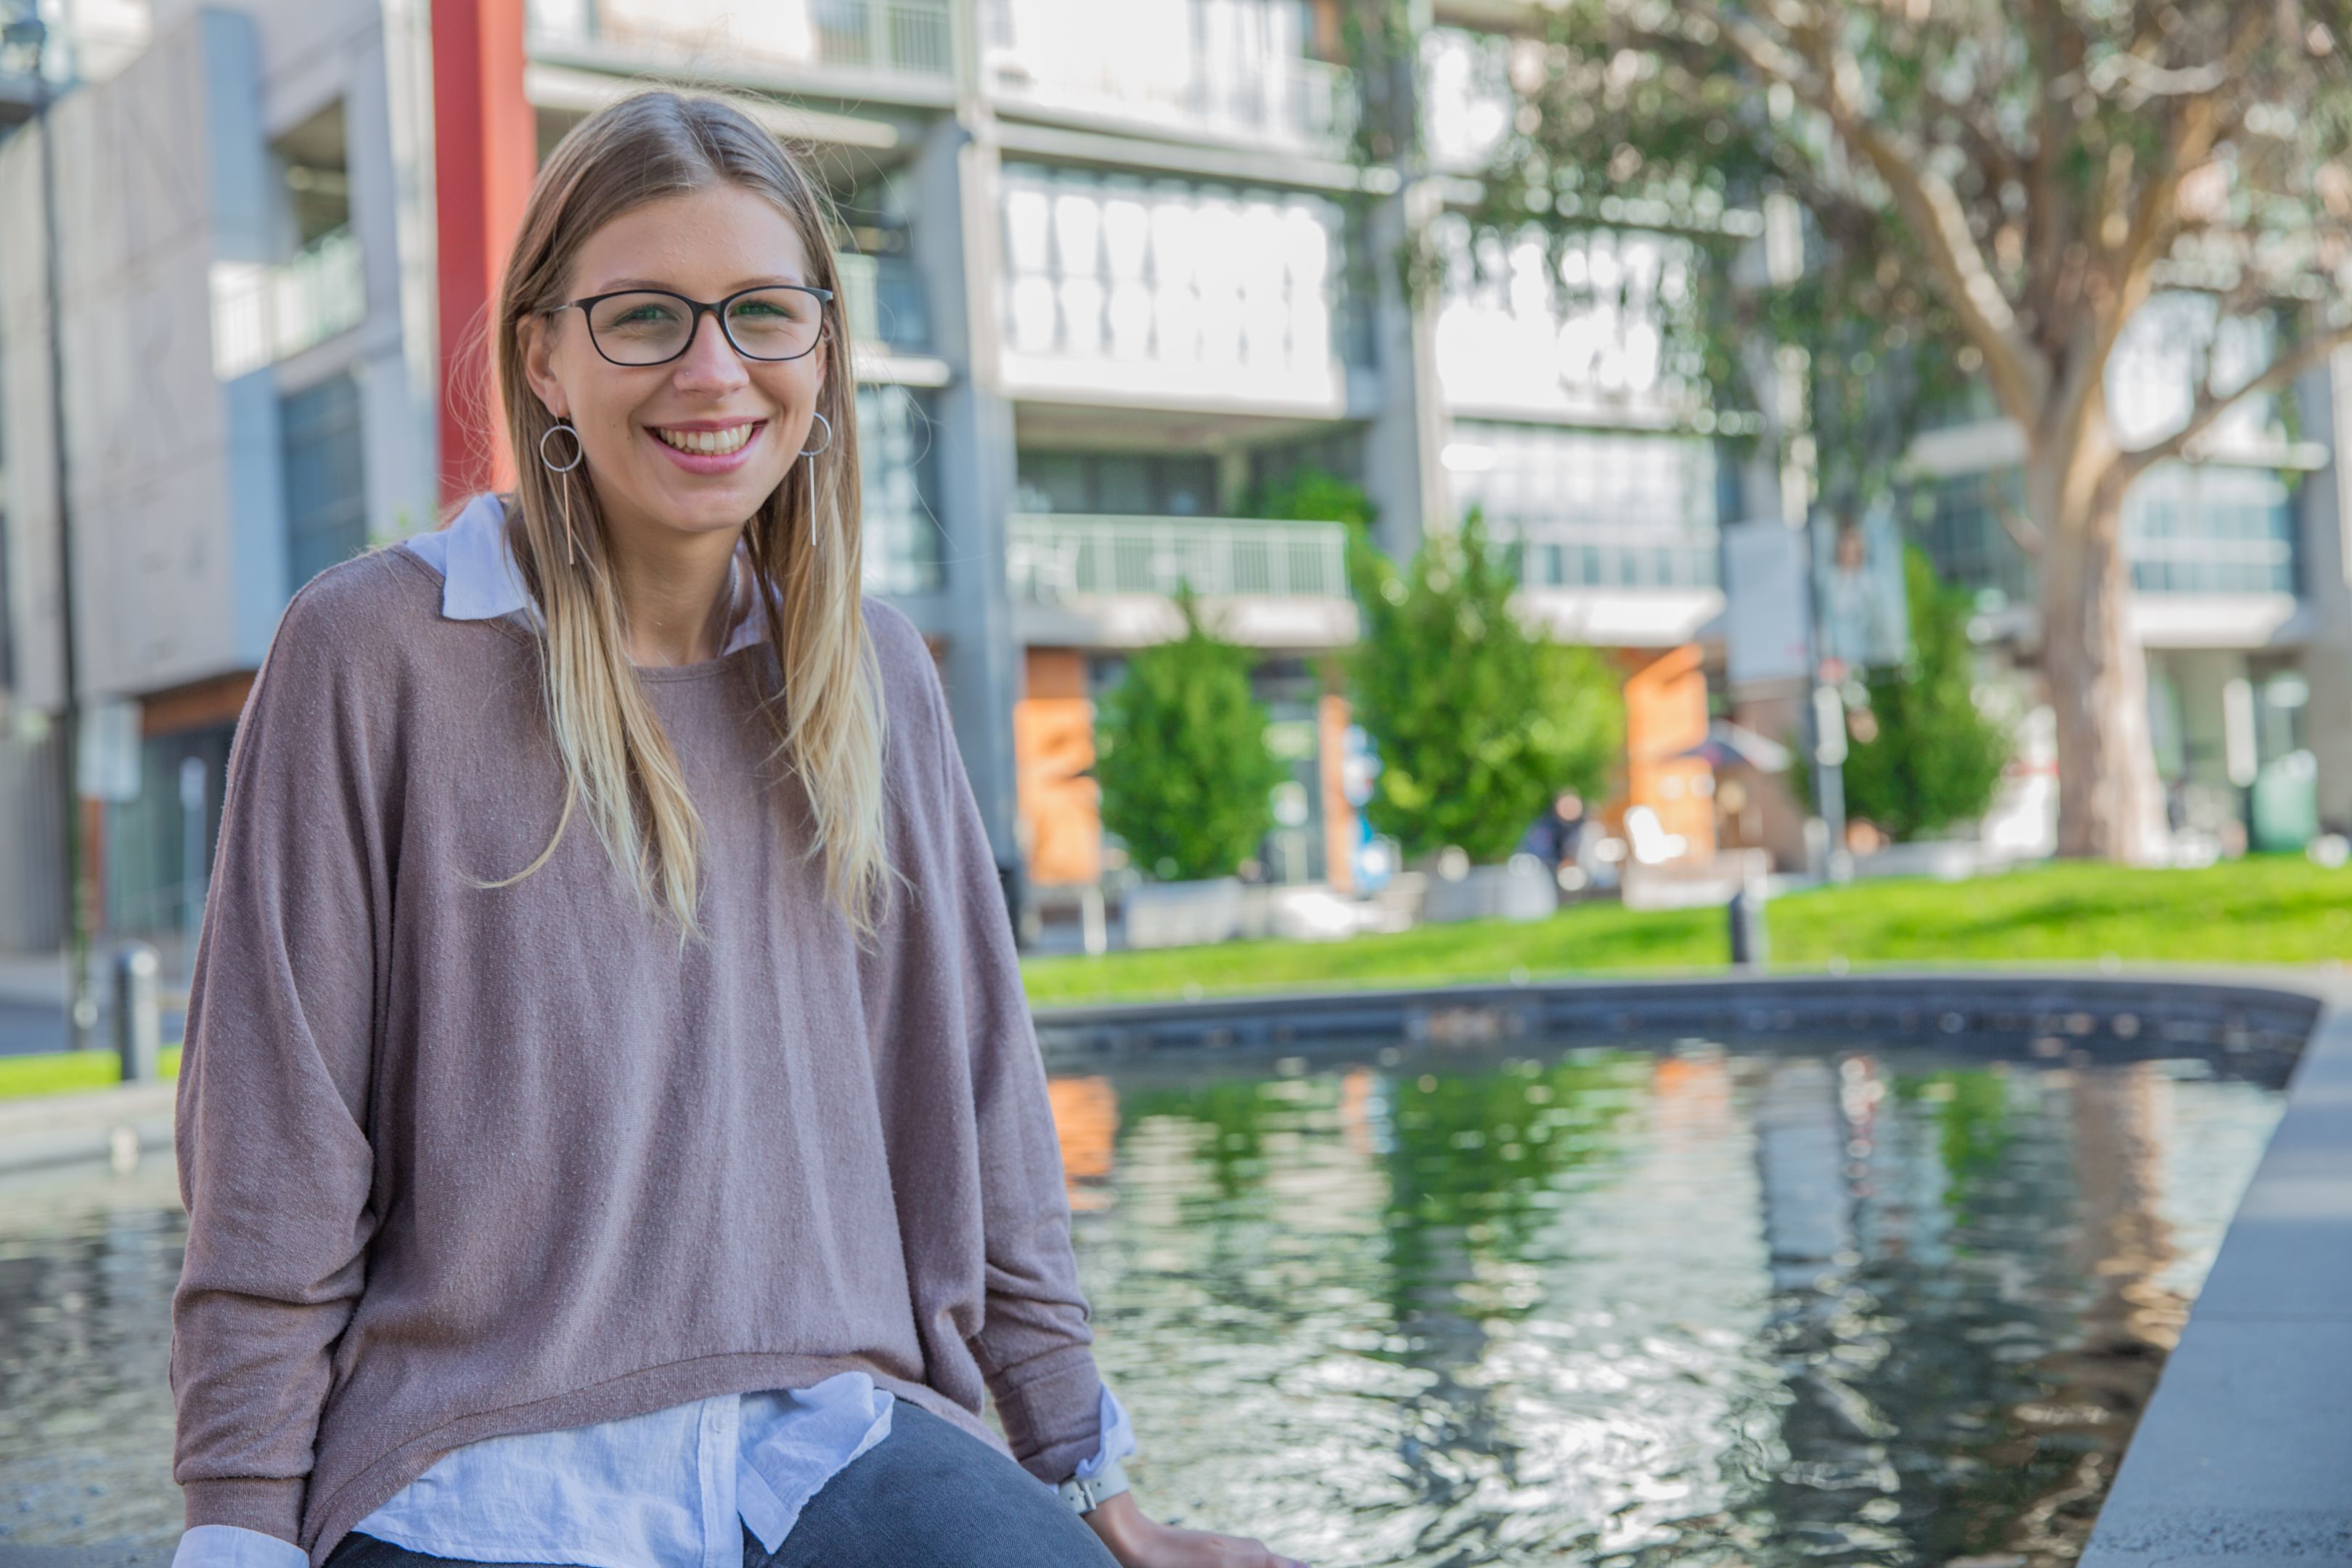 Swinburne student, Sally, sitting outdoors in front of a water fountain for her work placement. at Swinburne Abroad.